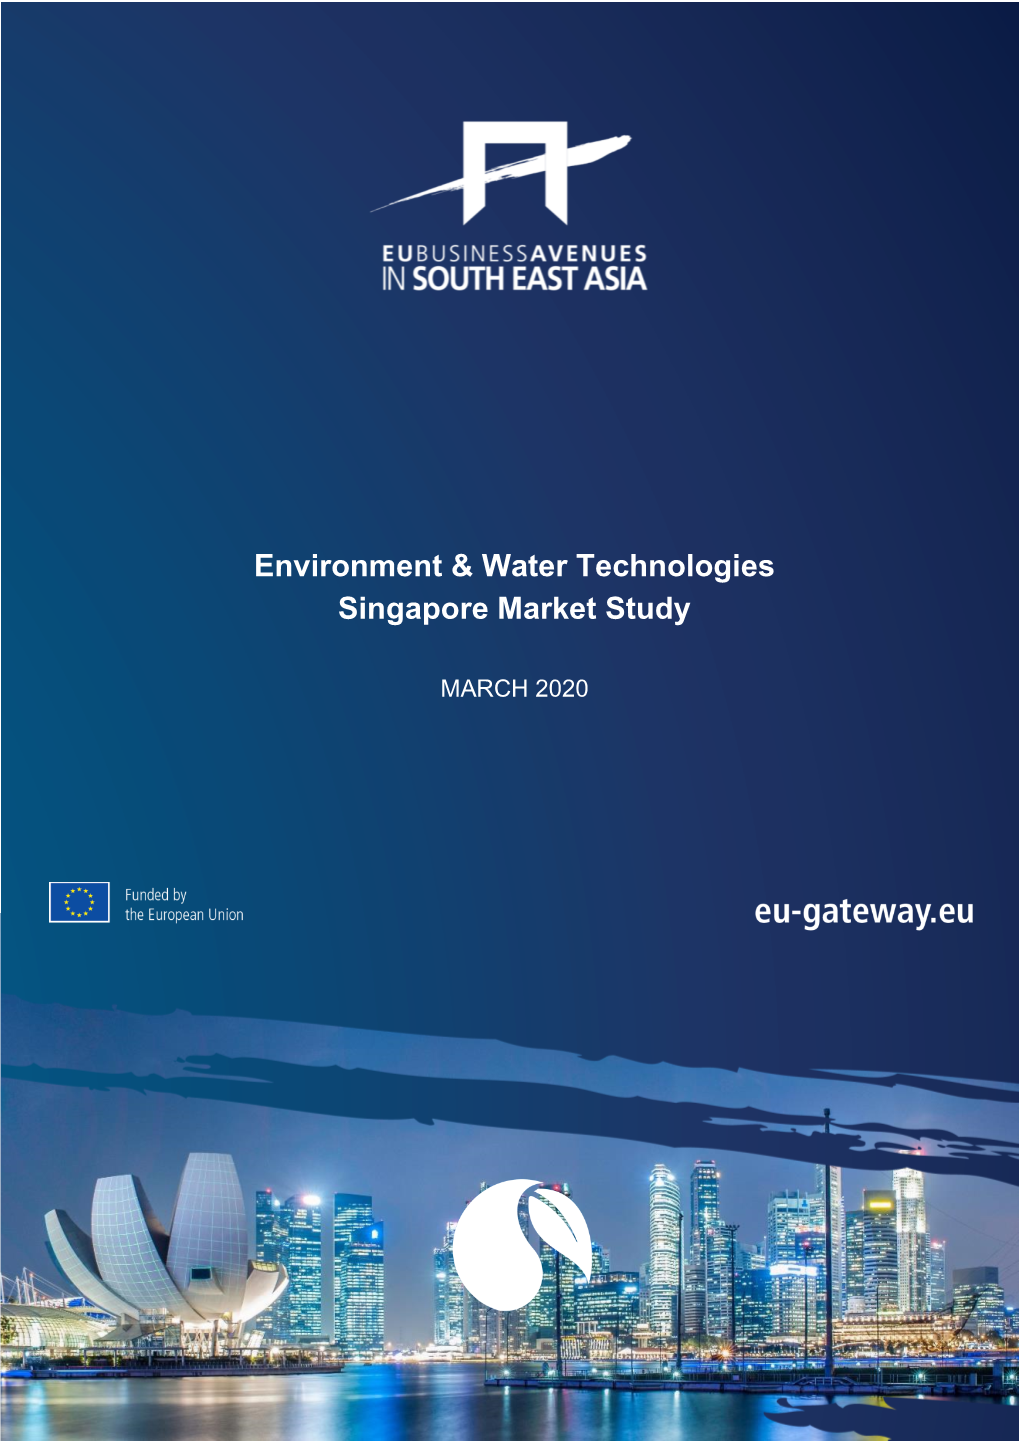 Environment & Water Technologies Sector (Singapore Market Study)